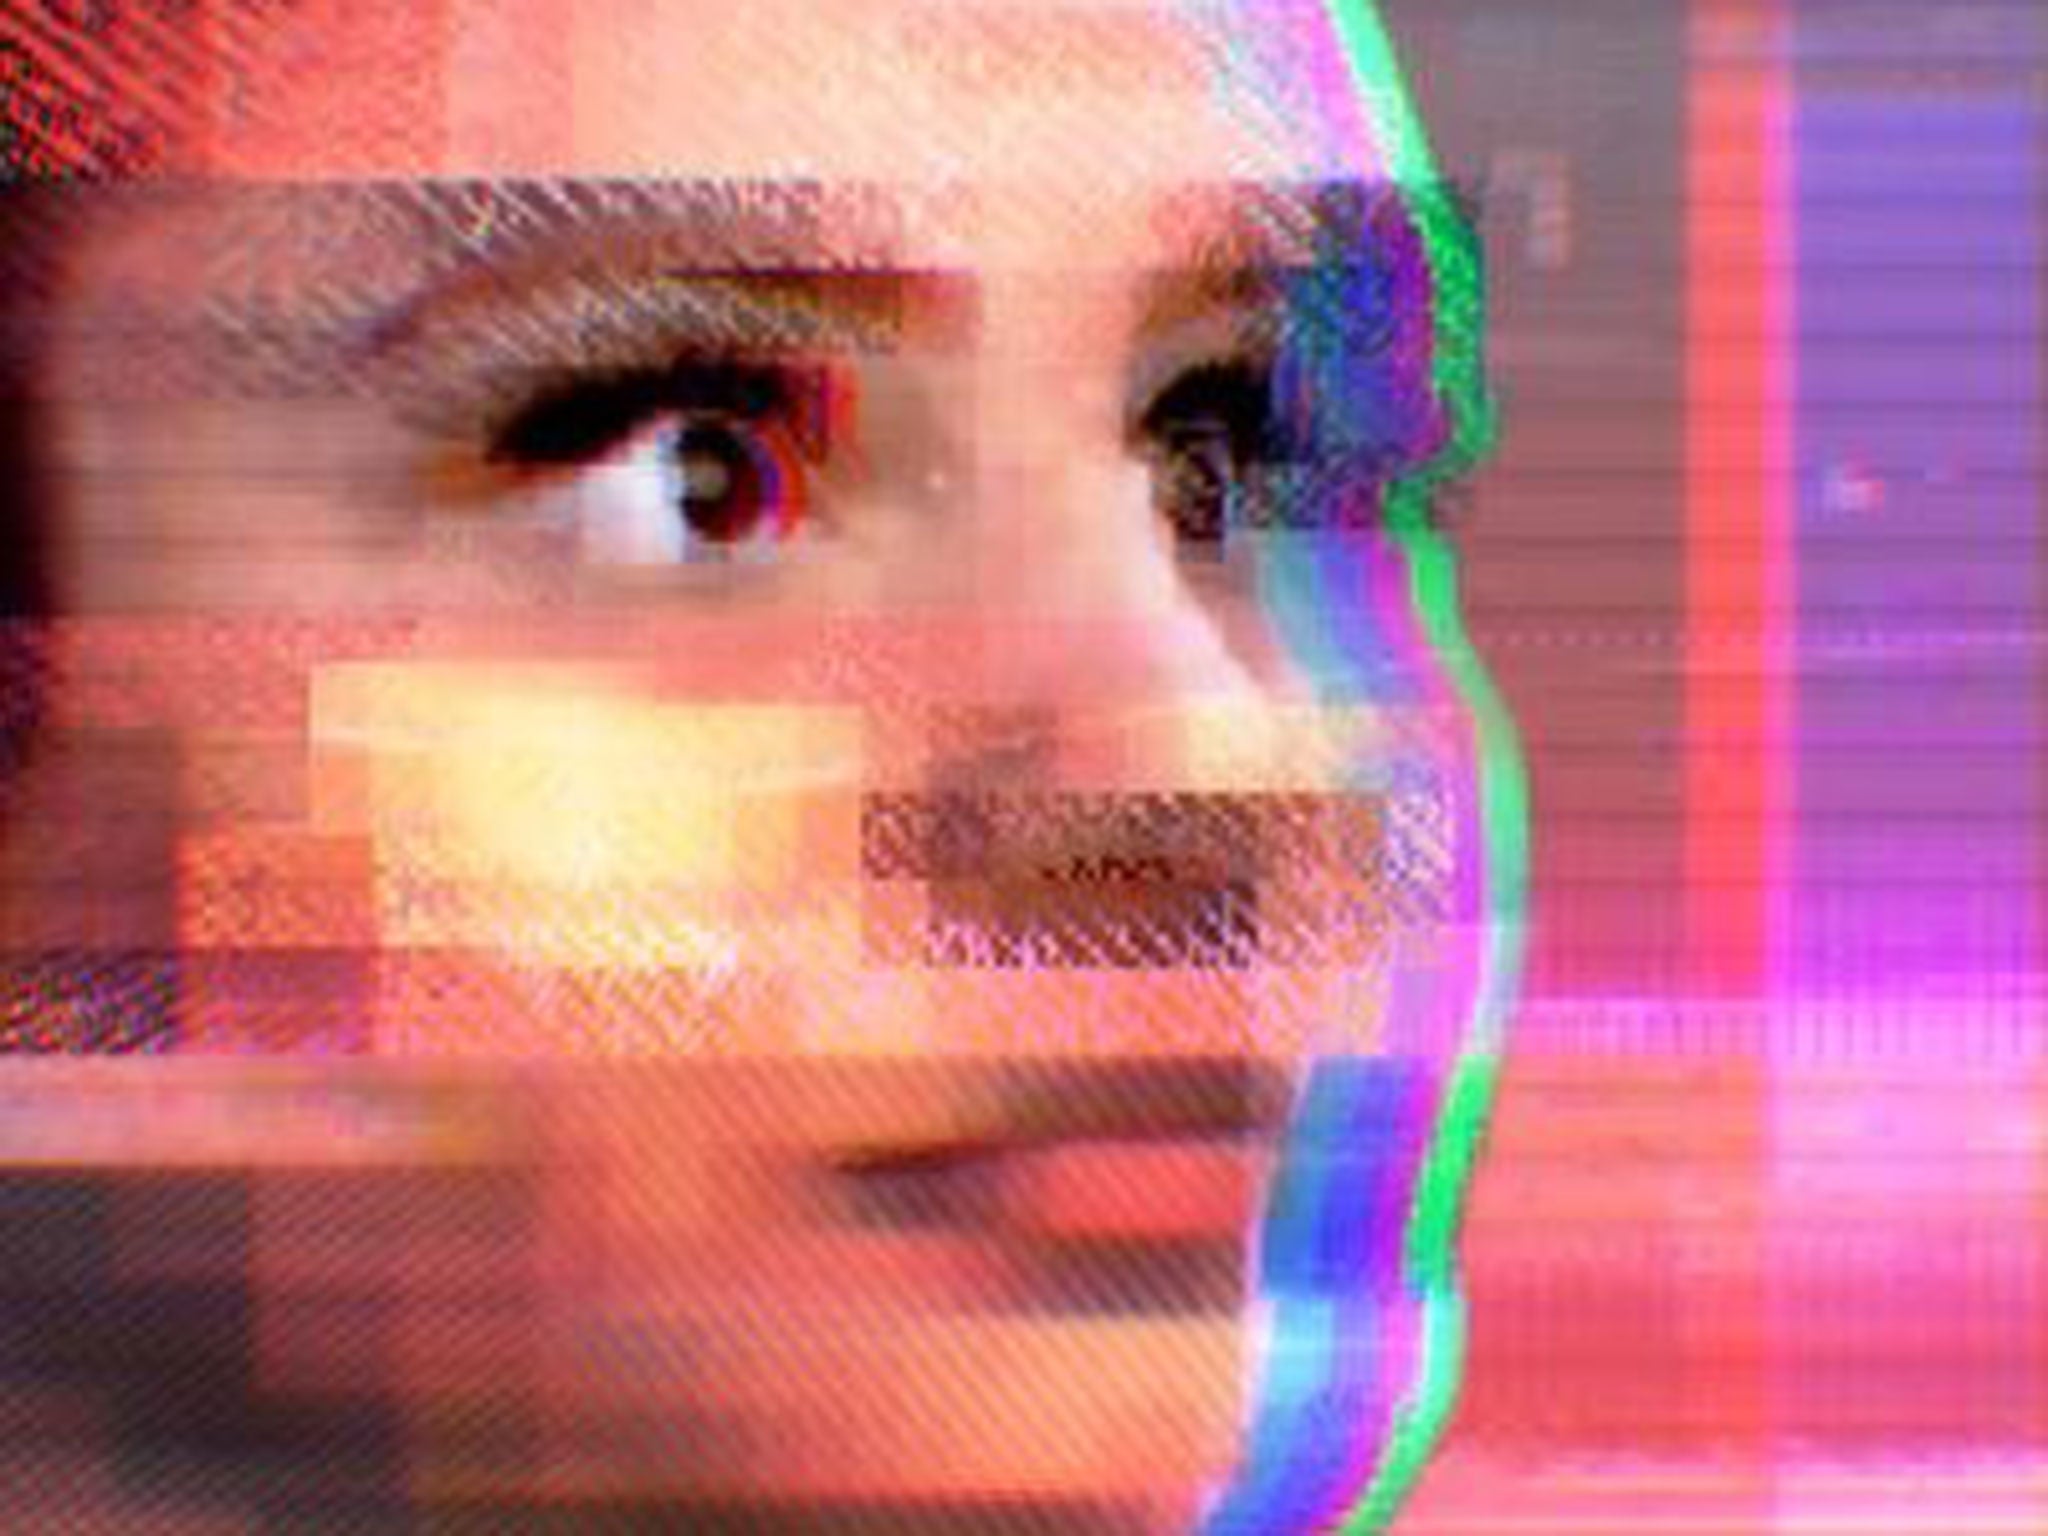 Microsoft’s Twitter chatbot, Tay, turned into a racist troll within 24 hours before being shut down